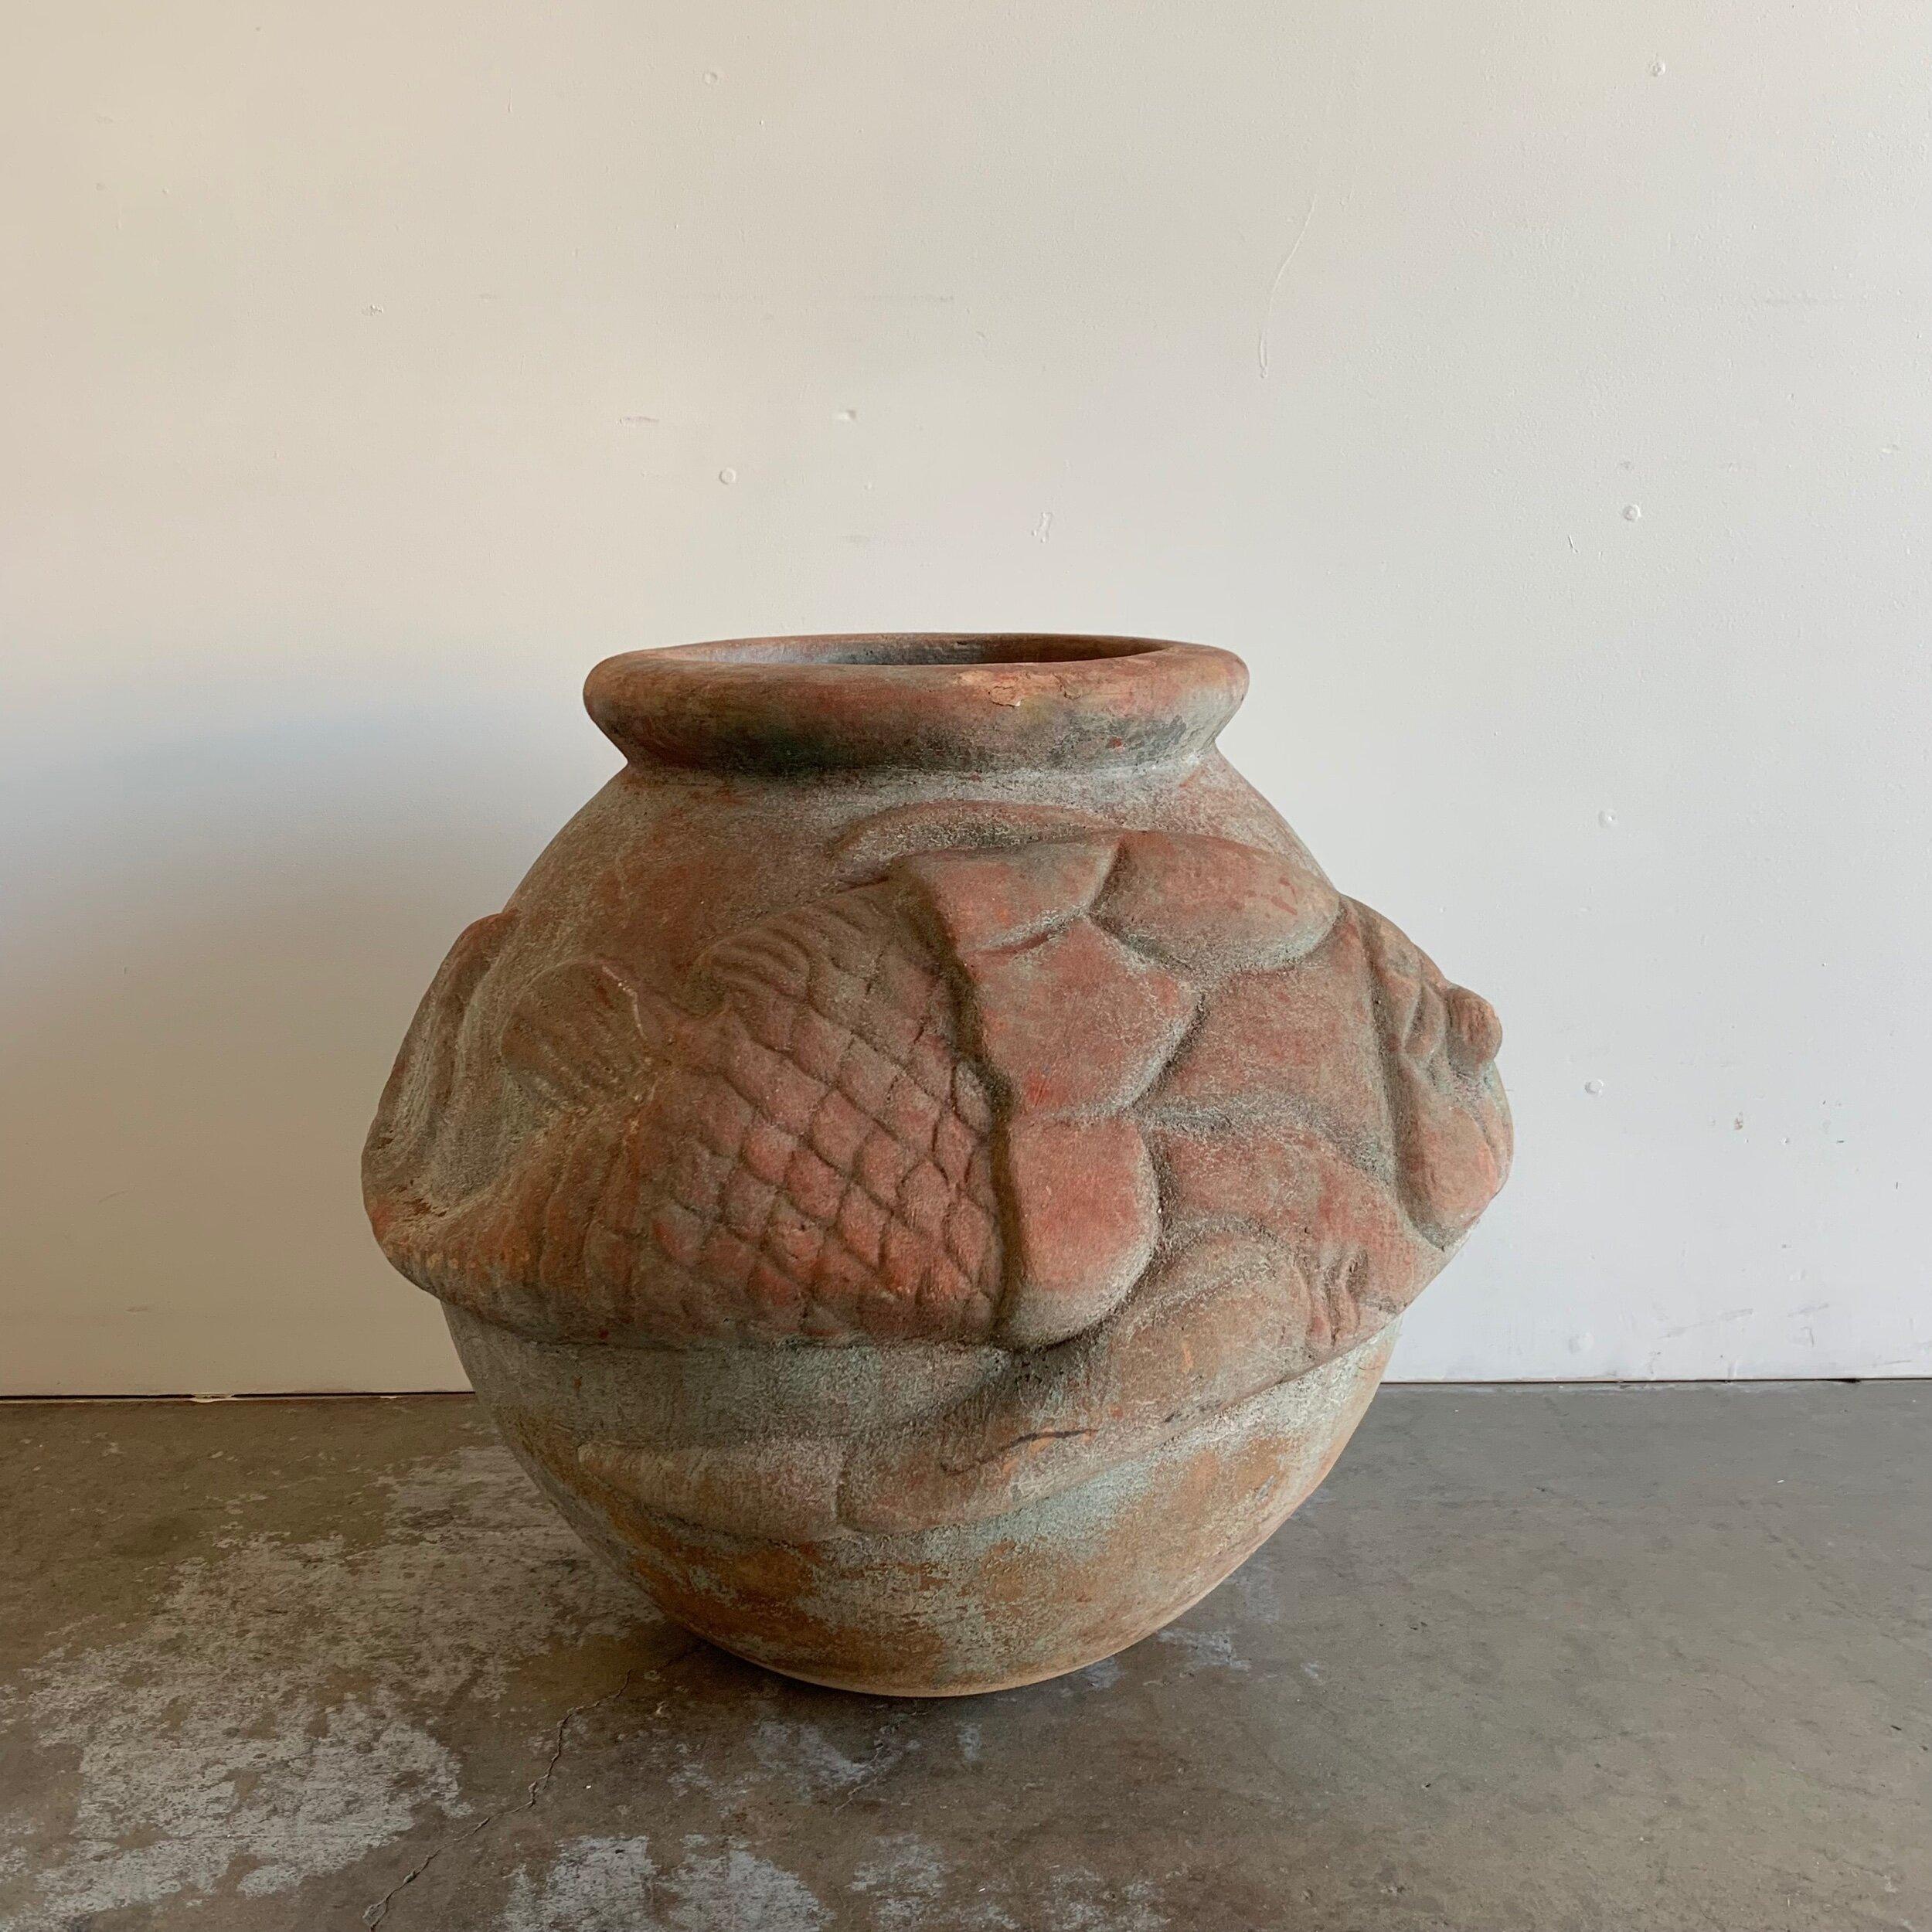 Measures : W22.5 D22.5 H21.75

Made of terracotta with a koi Fish Design in front, there is no drainage hole.